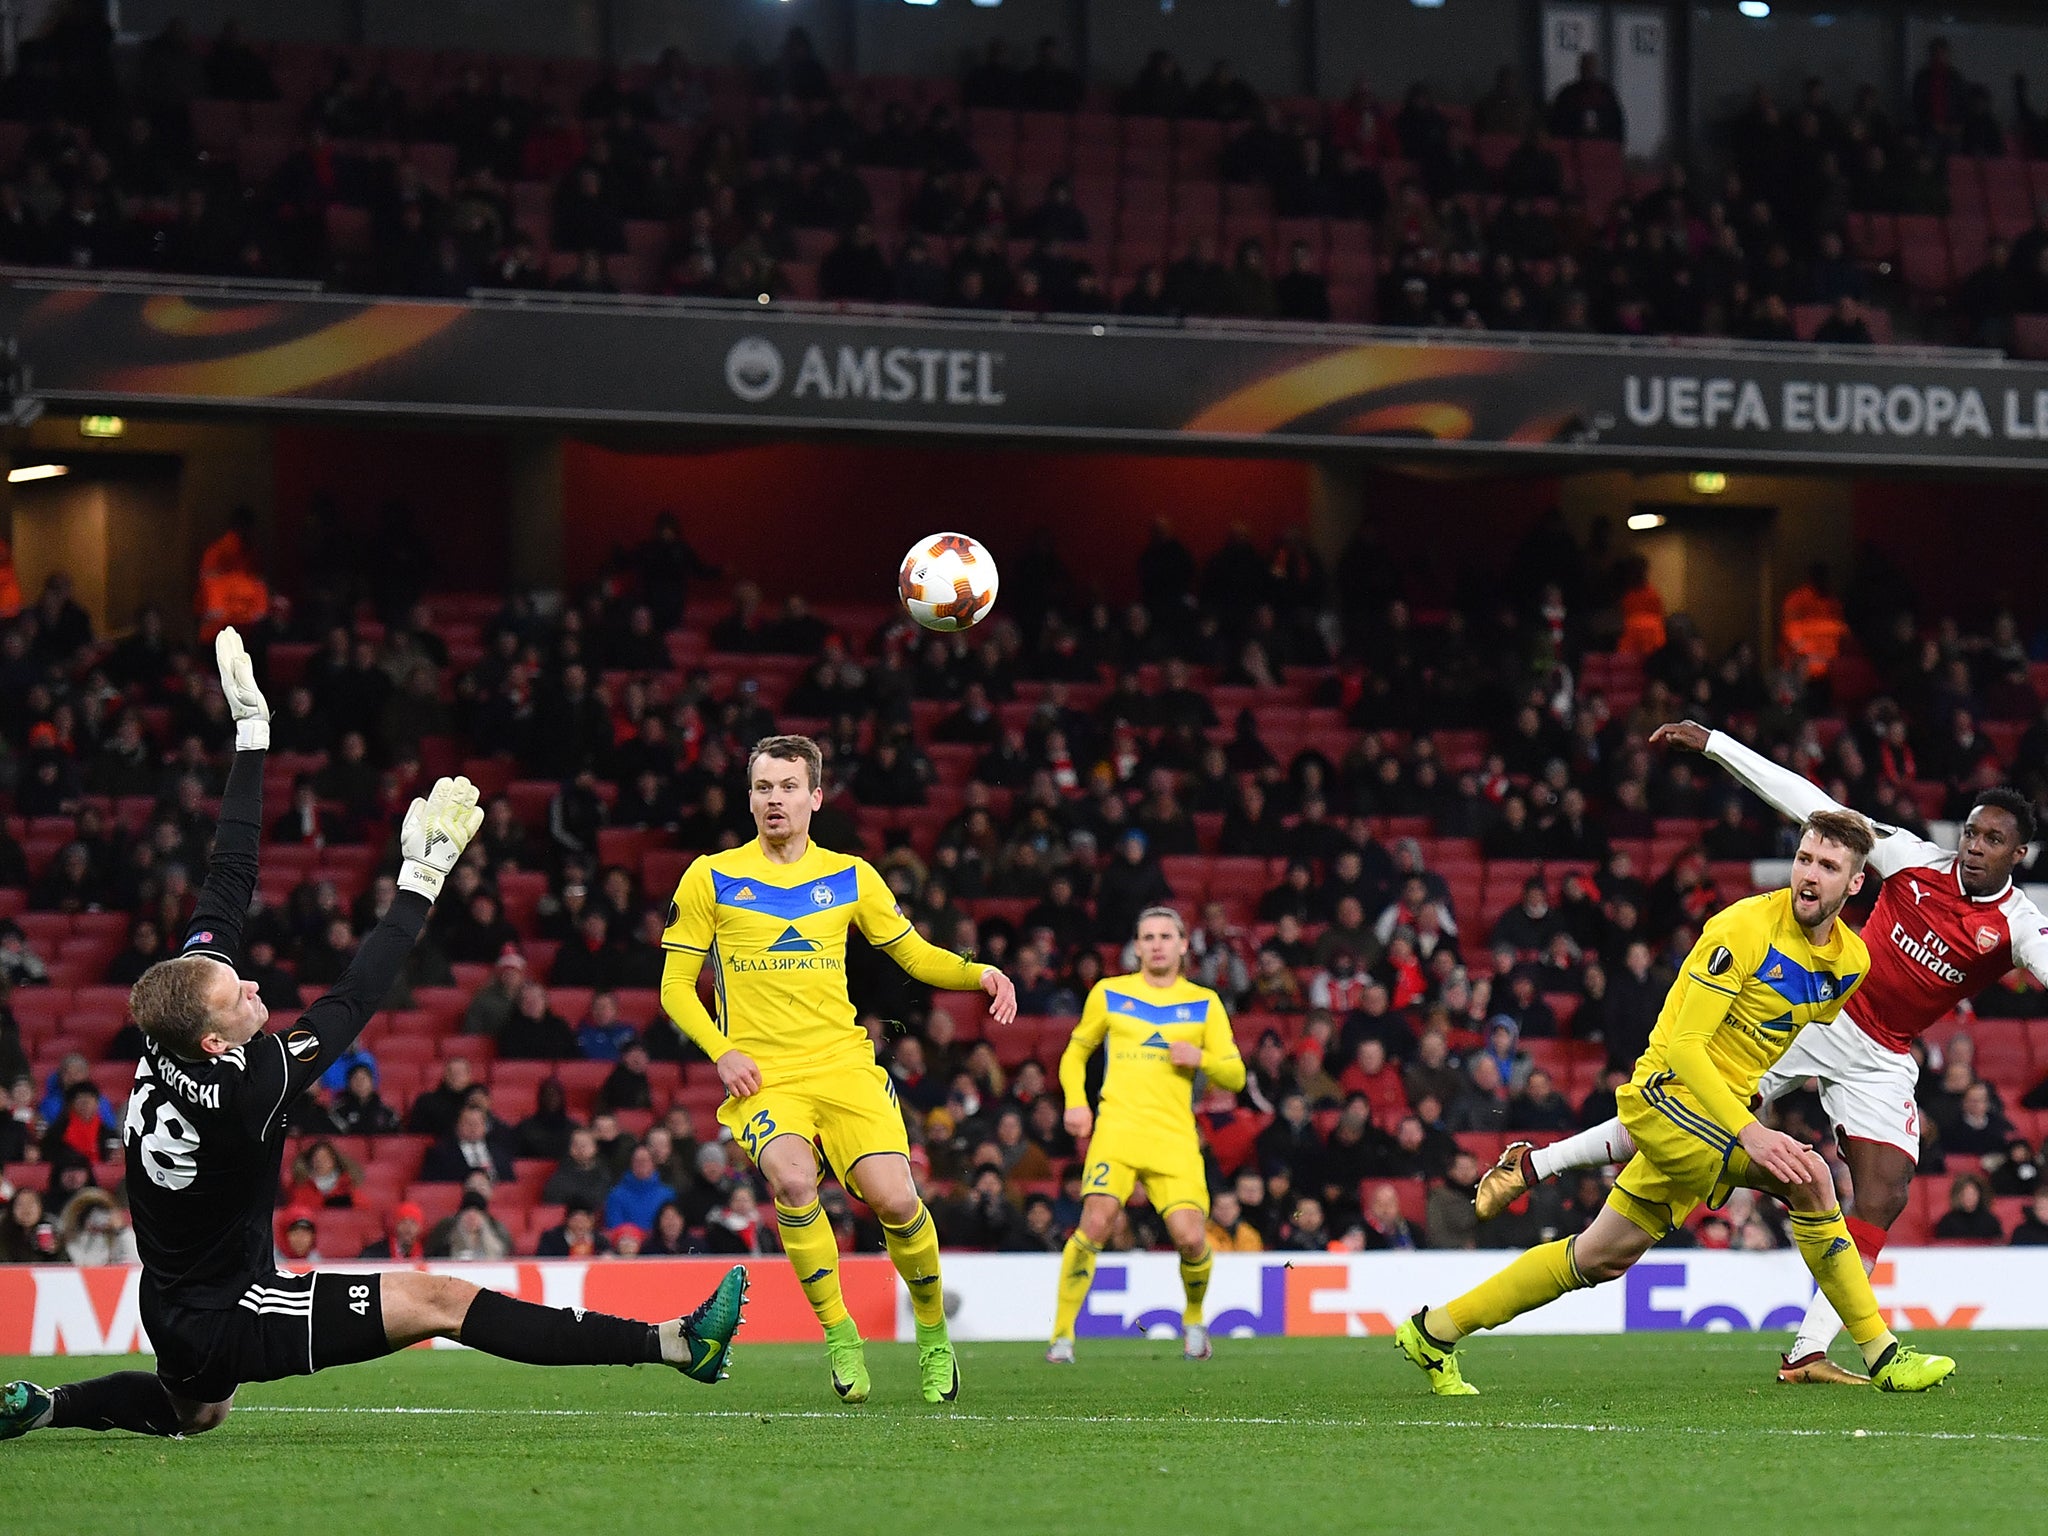 Arsenal's 6-0 win over BATE Borisov was played in front of 'just under 30,000' people